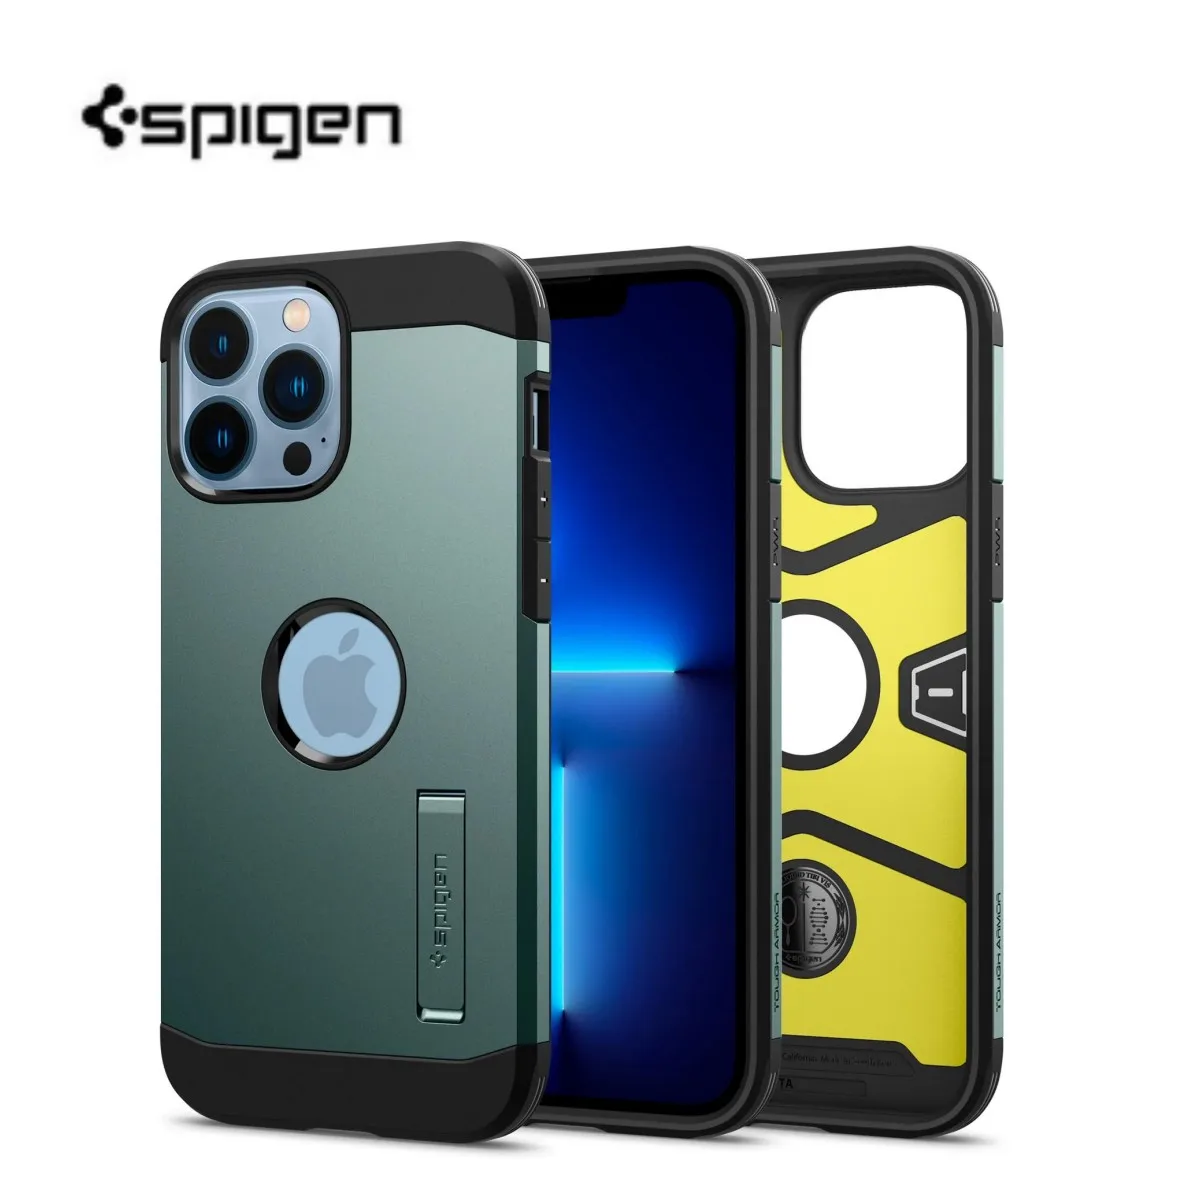 

Spigen Tough Armor Stand And Dual Layer Cover For Apple iPhone12 13 Pro Max Built-in Kickstand Case For iPhone 14 Pro Max